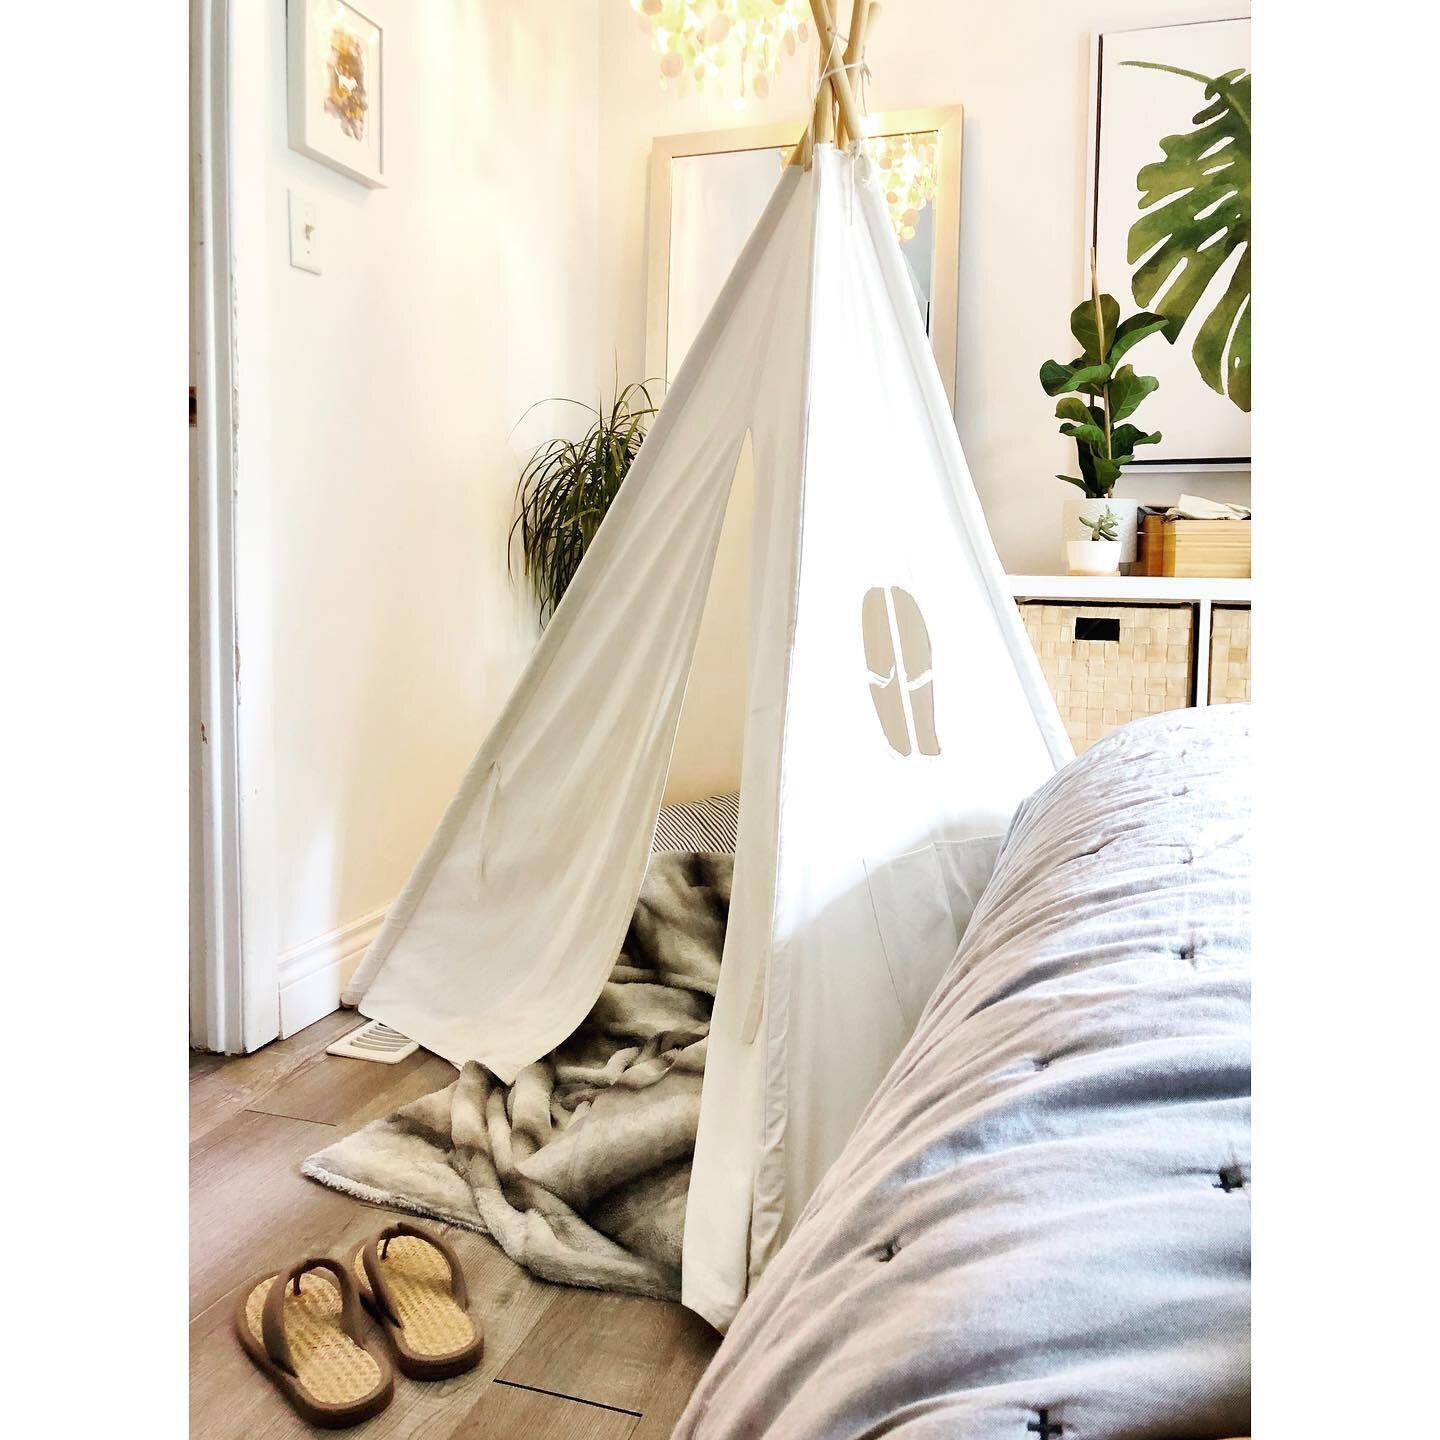 *Someone* has been camping out over here lately and loving it.😏⛺️🥰 #smallspaces #nospace #mamalife #safeathome #thisboyslife #torontohome #home #homelove #rumiMB #manquilahome